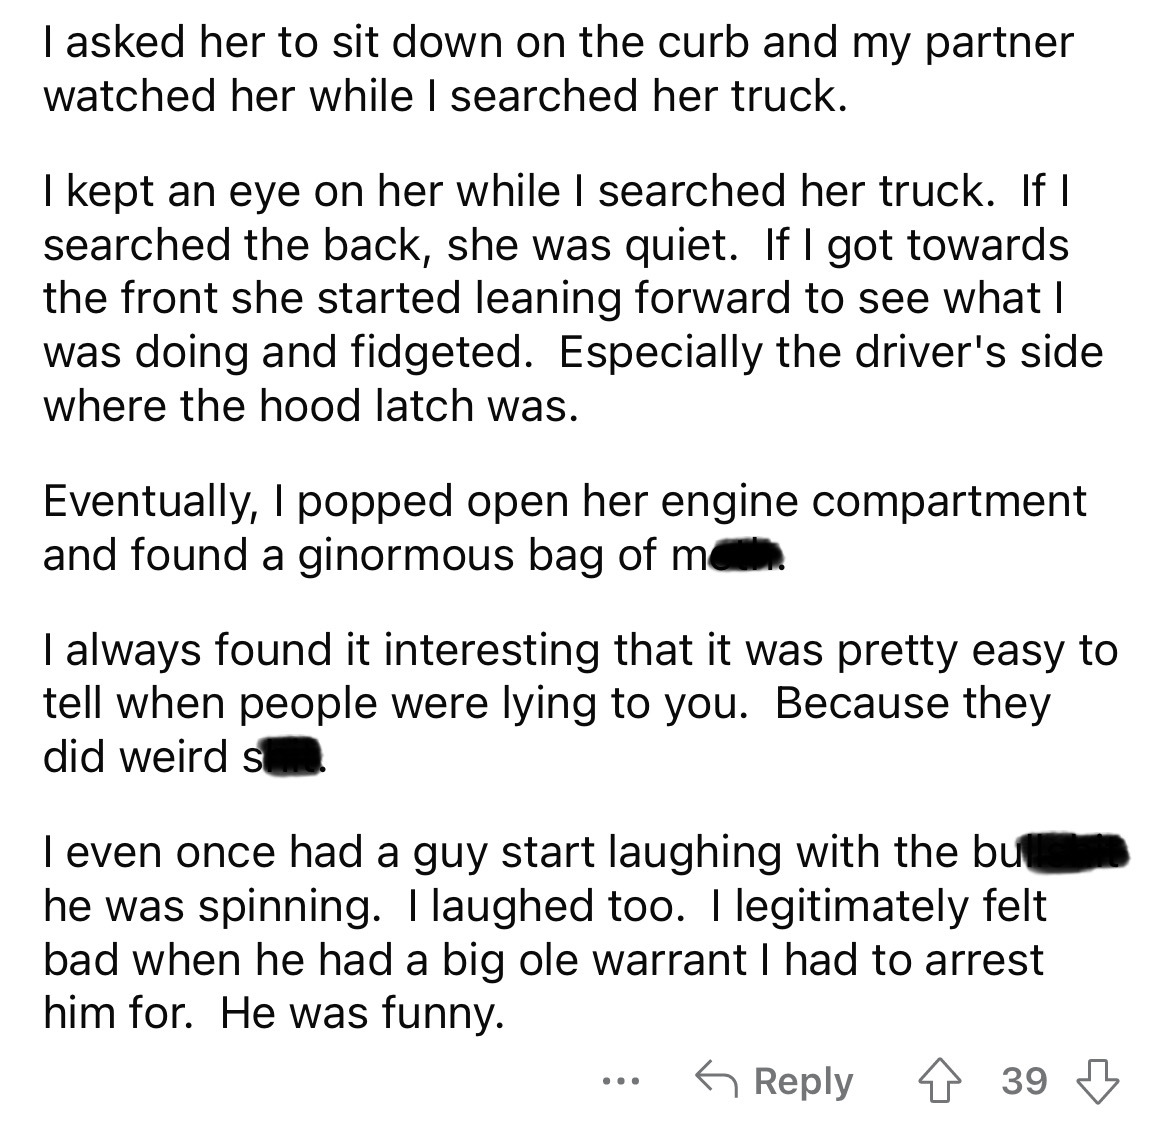 number - I asked her to sit down on the curb and my partner watched her while I searched her truck. I kept an eye on her while I searched her truck. If I searched the back, she was quiet. If I got towards the front she started leaning forward to see what 